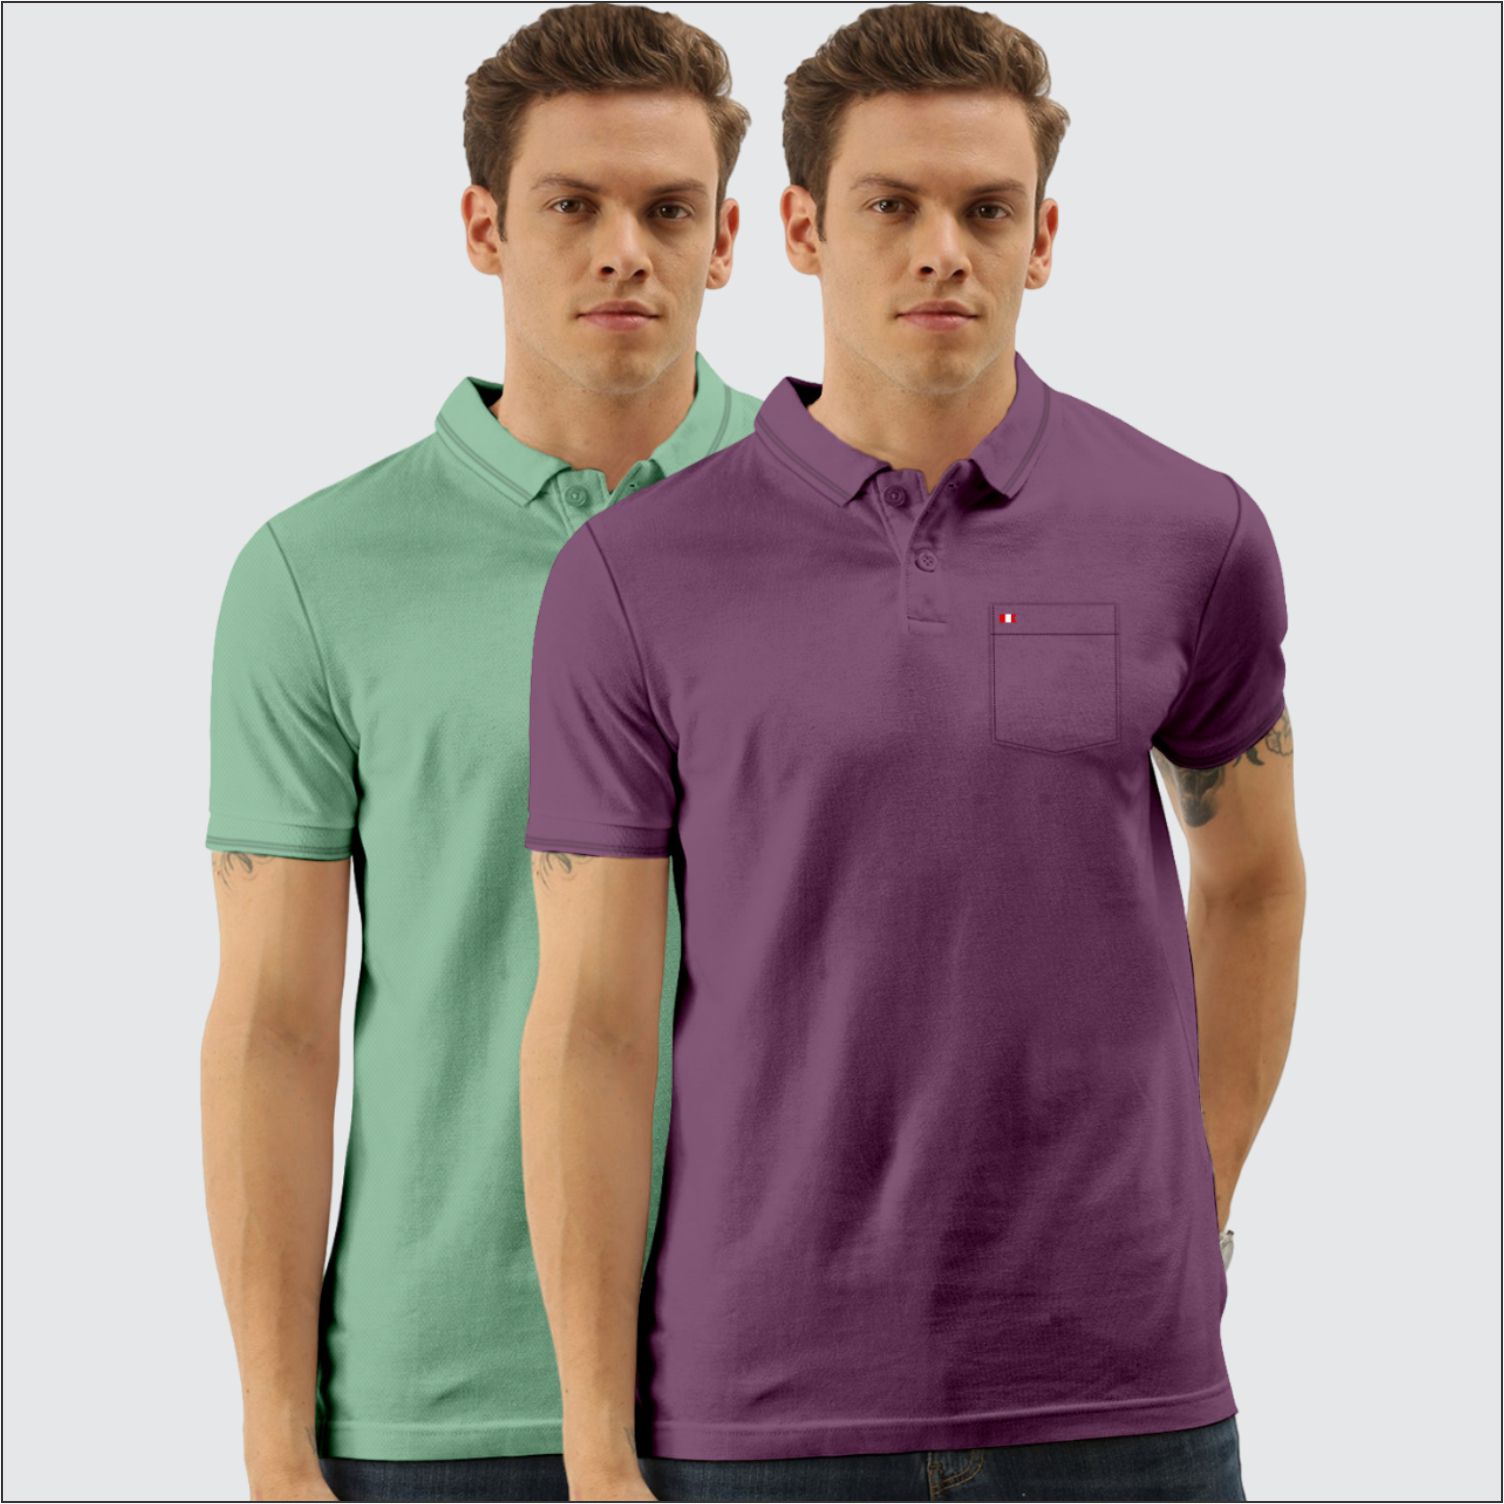     			TAB91 Cotton Blend Slim Fit Solid Half Sleeves Men's Polo T Shirt - Mint Green ( Pack of 2 )